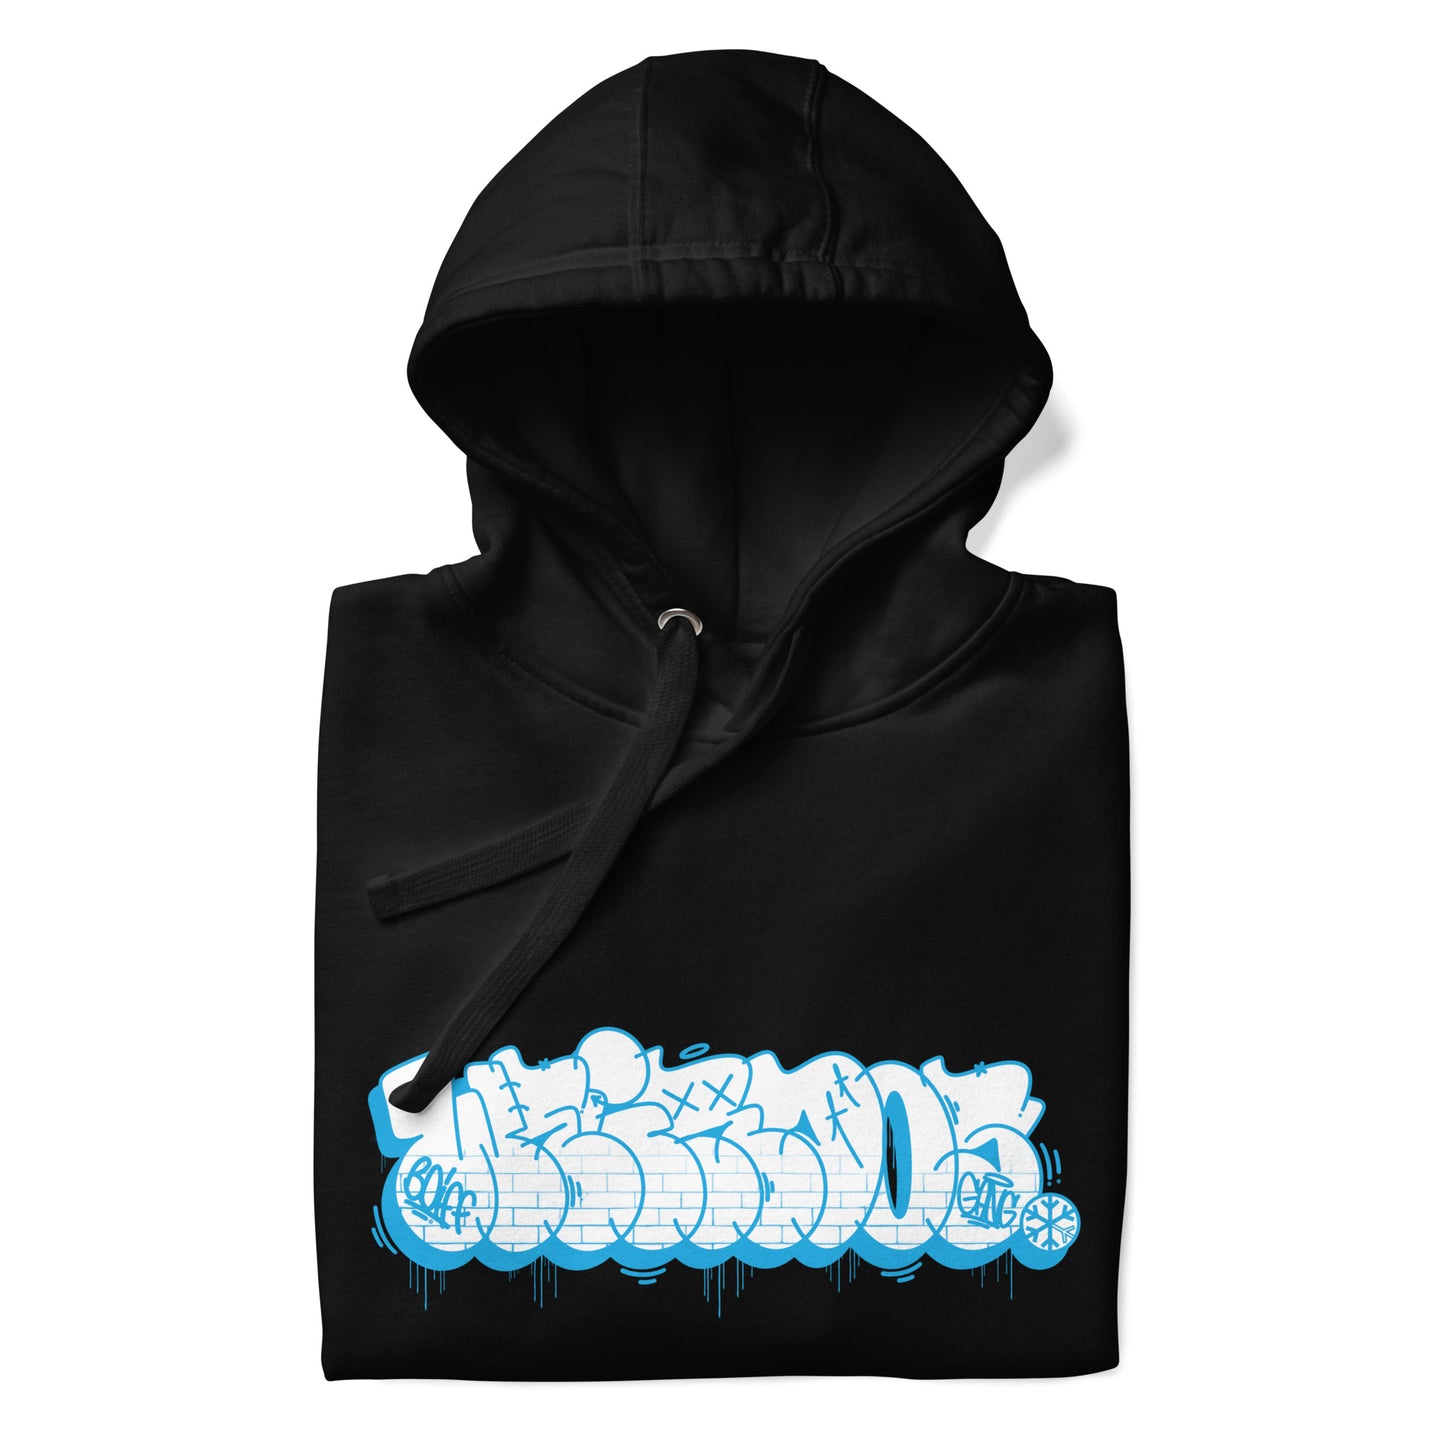 folded hoodie Weirdos Gang by Josh Grafx B.Different Clothing street art graffiti inspired brand for weirdos, outsiders, and misfits.